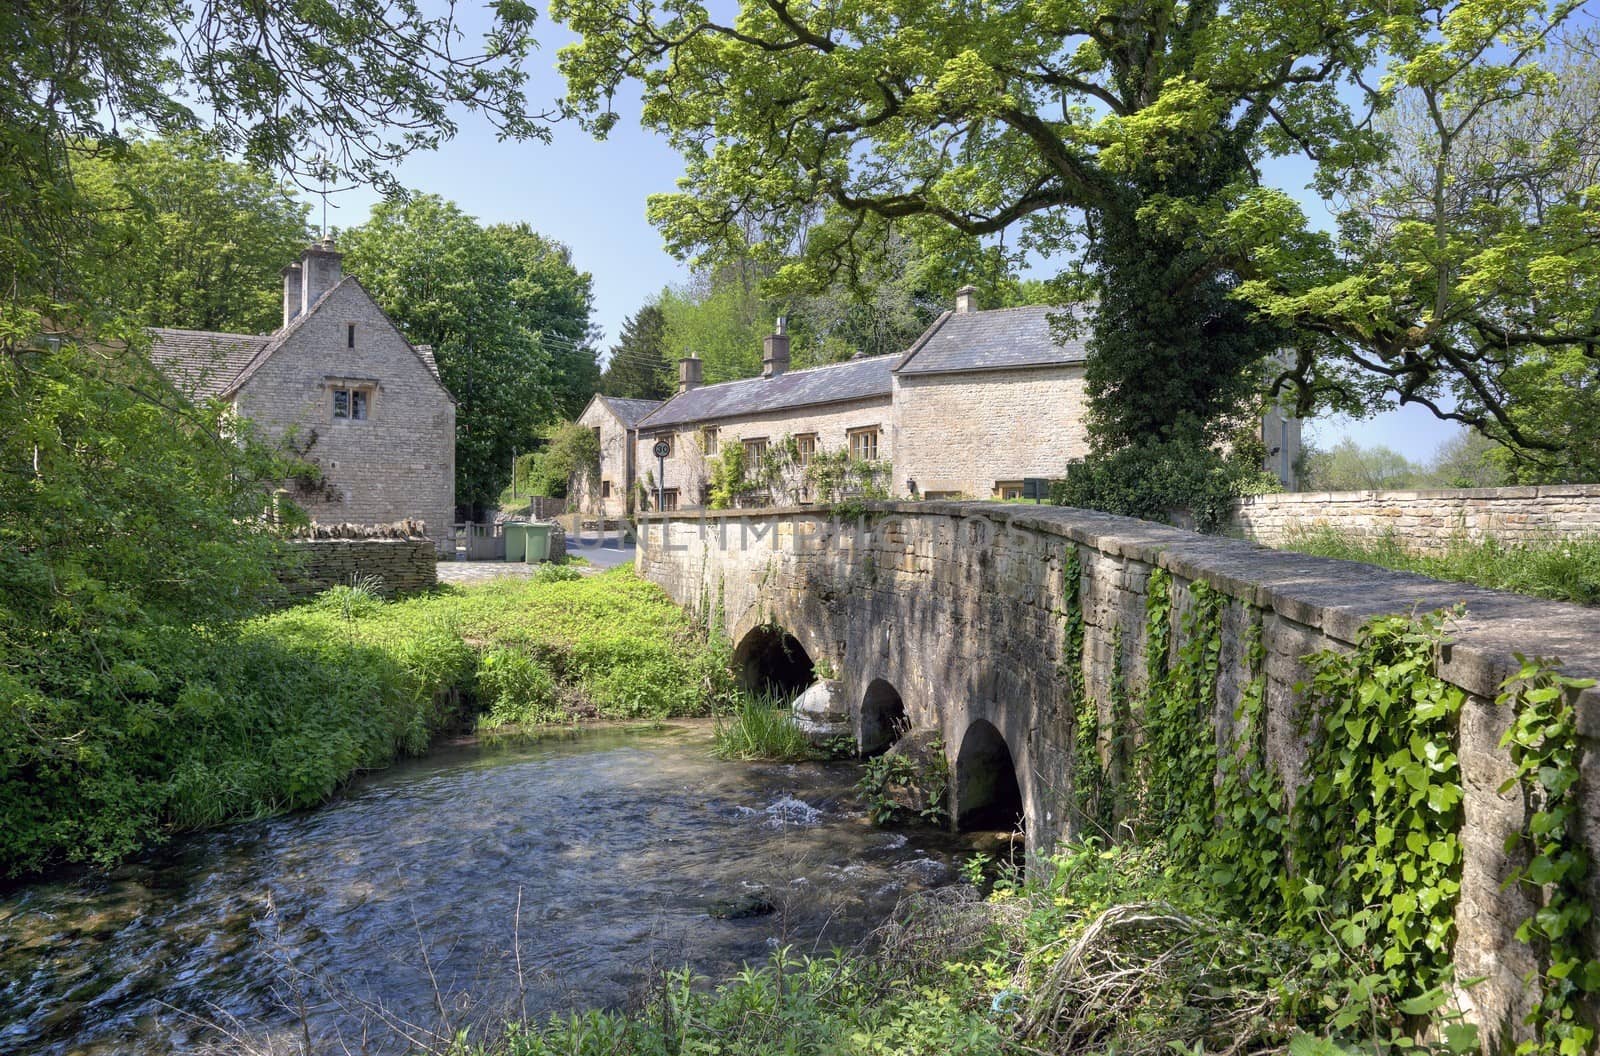 Upper Swell, a Cotswold village near Stow on the Wold, Gloucestershire, England.